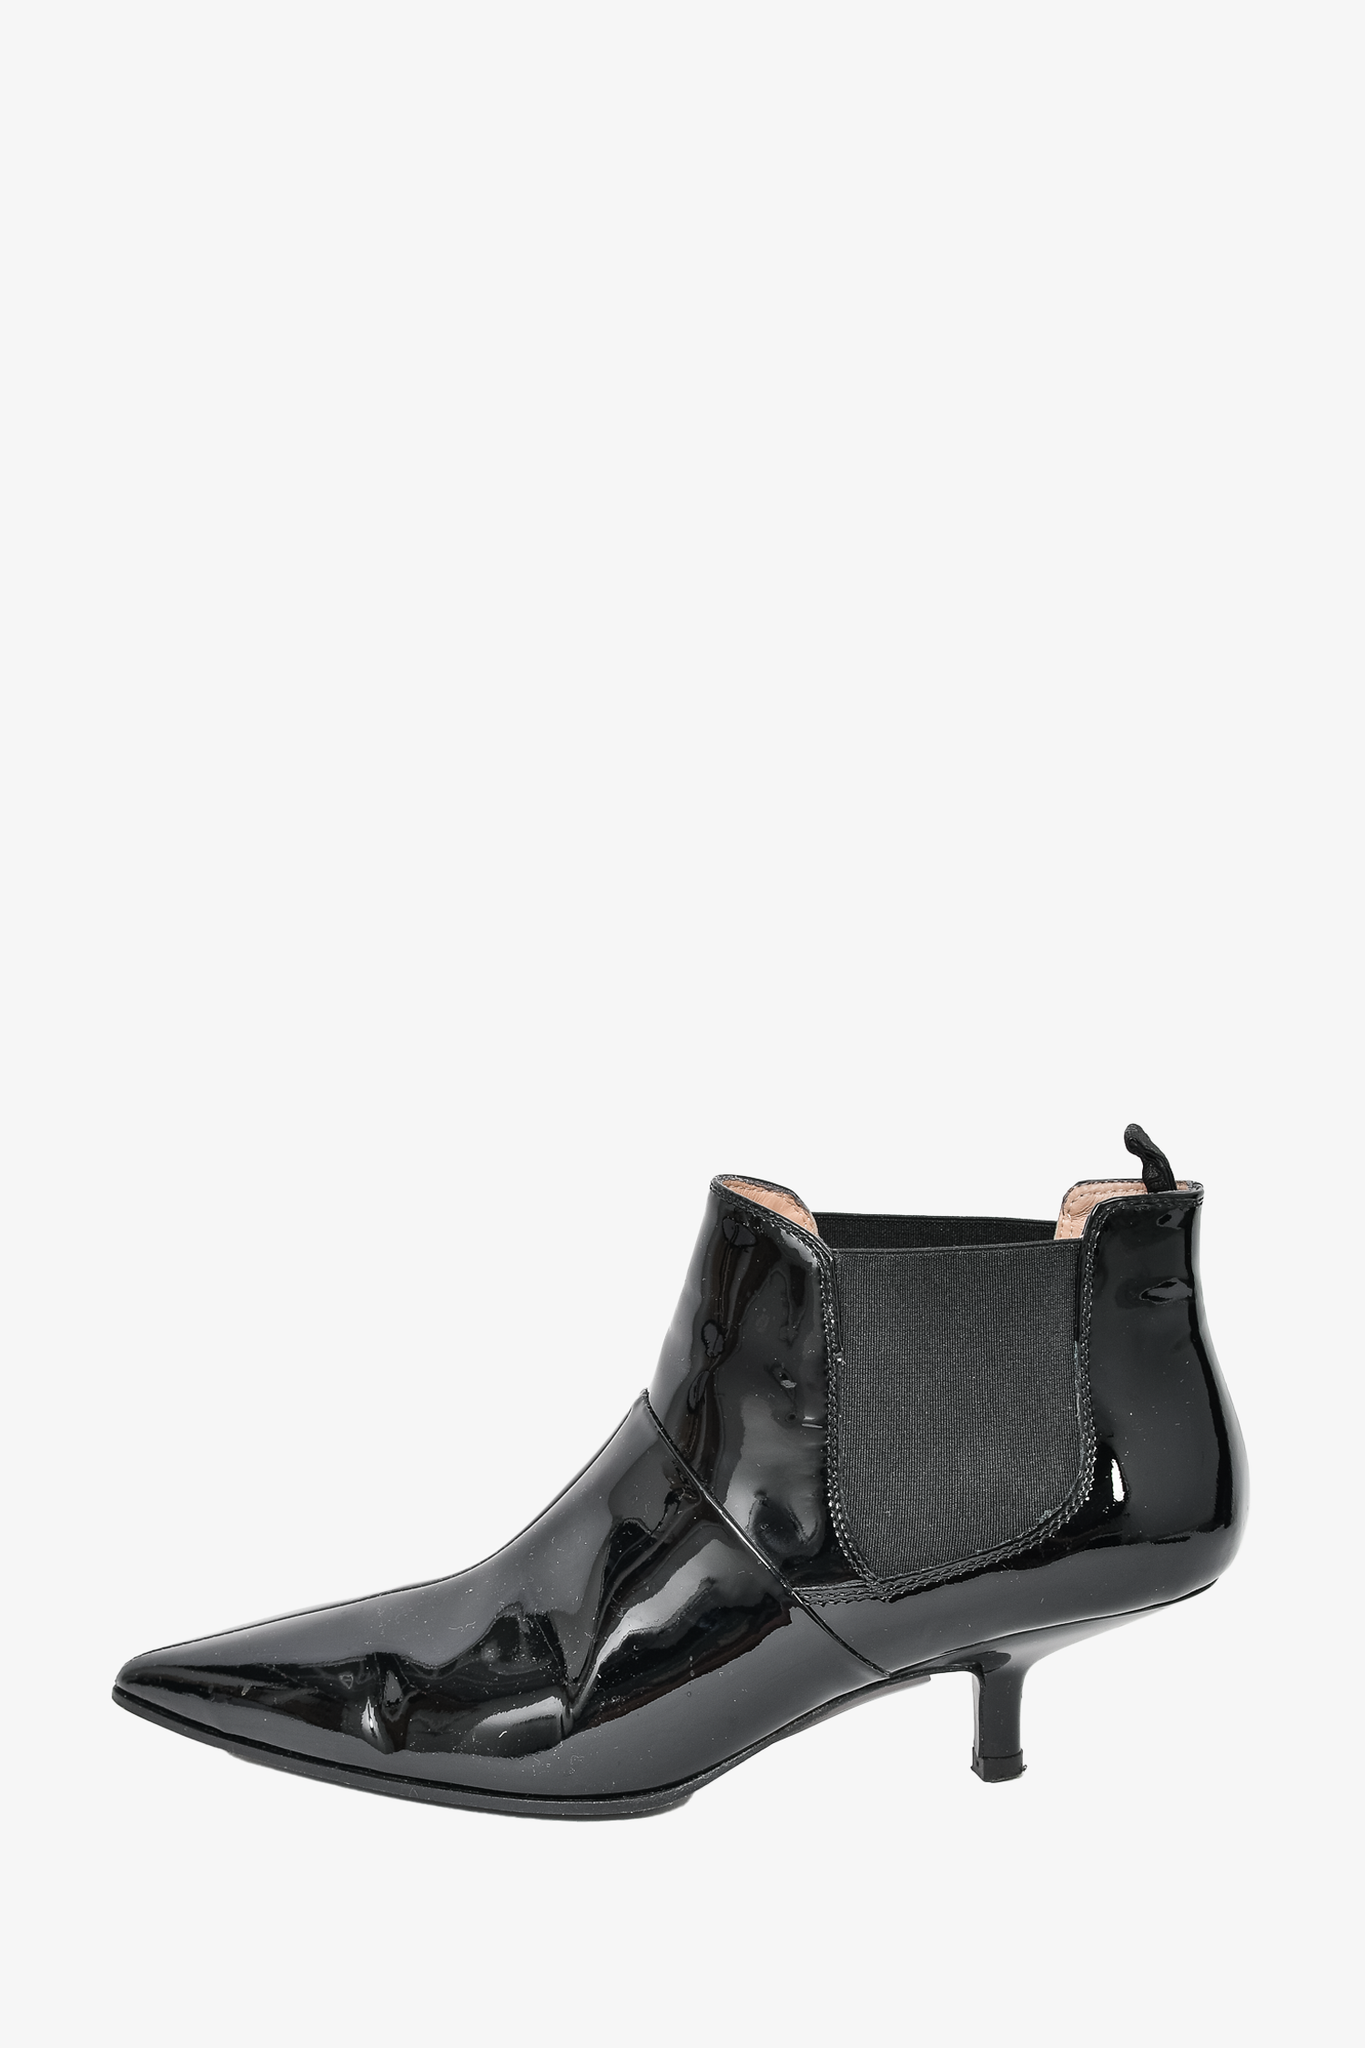 Acne Studios pre-owned black patent croc-print flat ankle boot